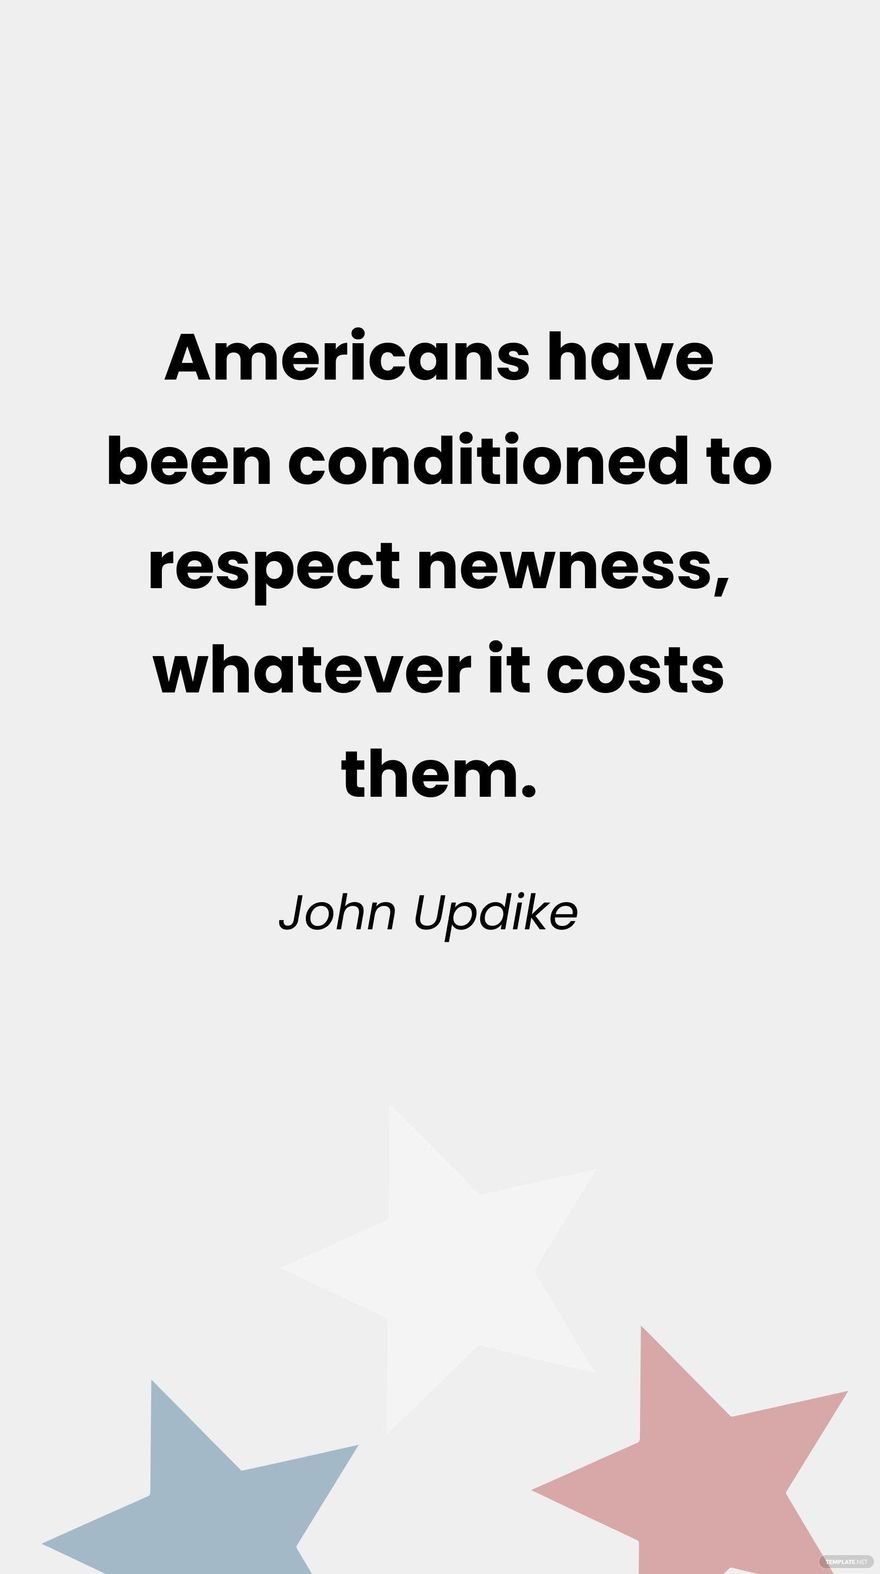 John Updike- Americans have been conditioned to respect newness, whatever it costs them.